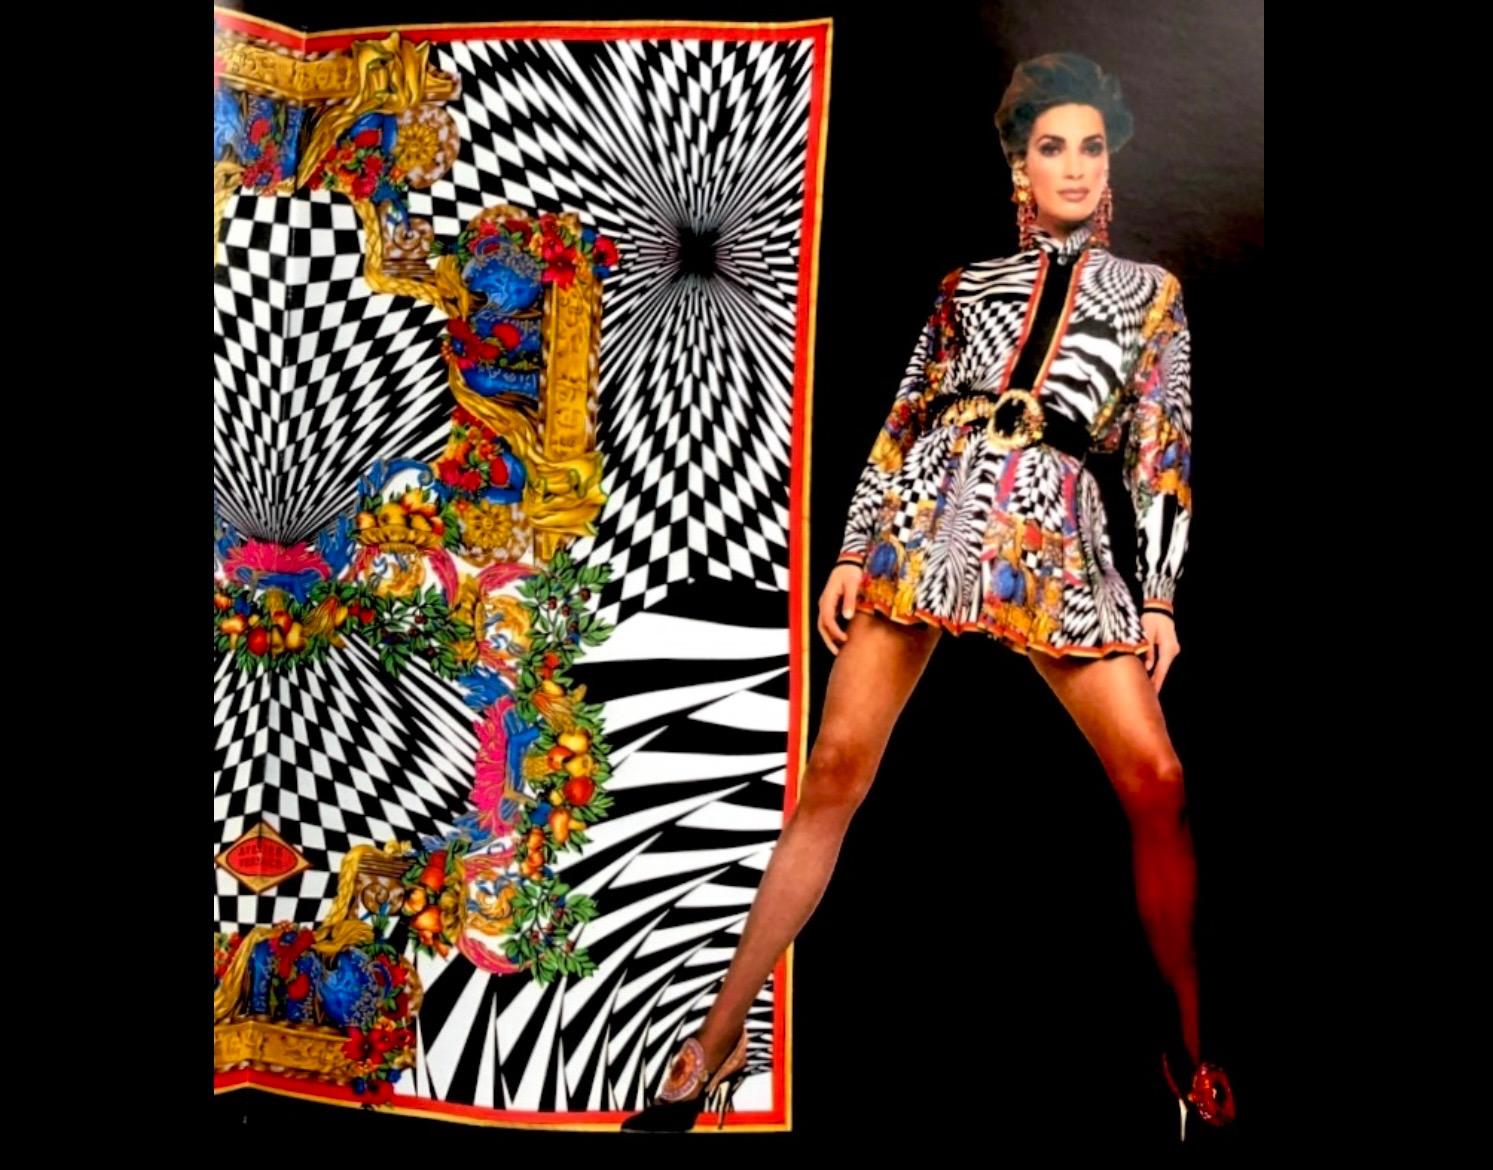 Presenting a fabulous vibrant silk Gianni Versace Couture skirt set, designed by Gianni Versace. From the Fall/Winter 1991, this set was highlighted in the season's lookbook photographed by Herb Ritts. This incredible set is covered in Gianni's